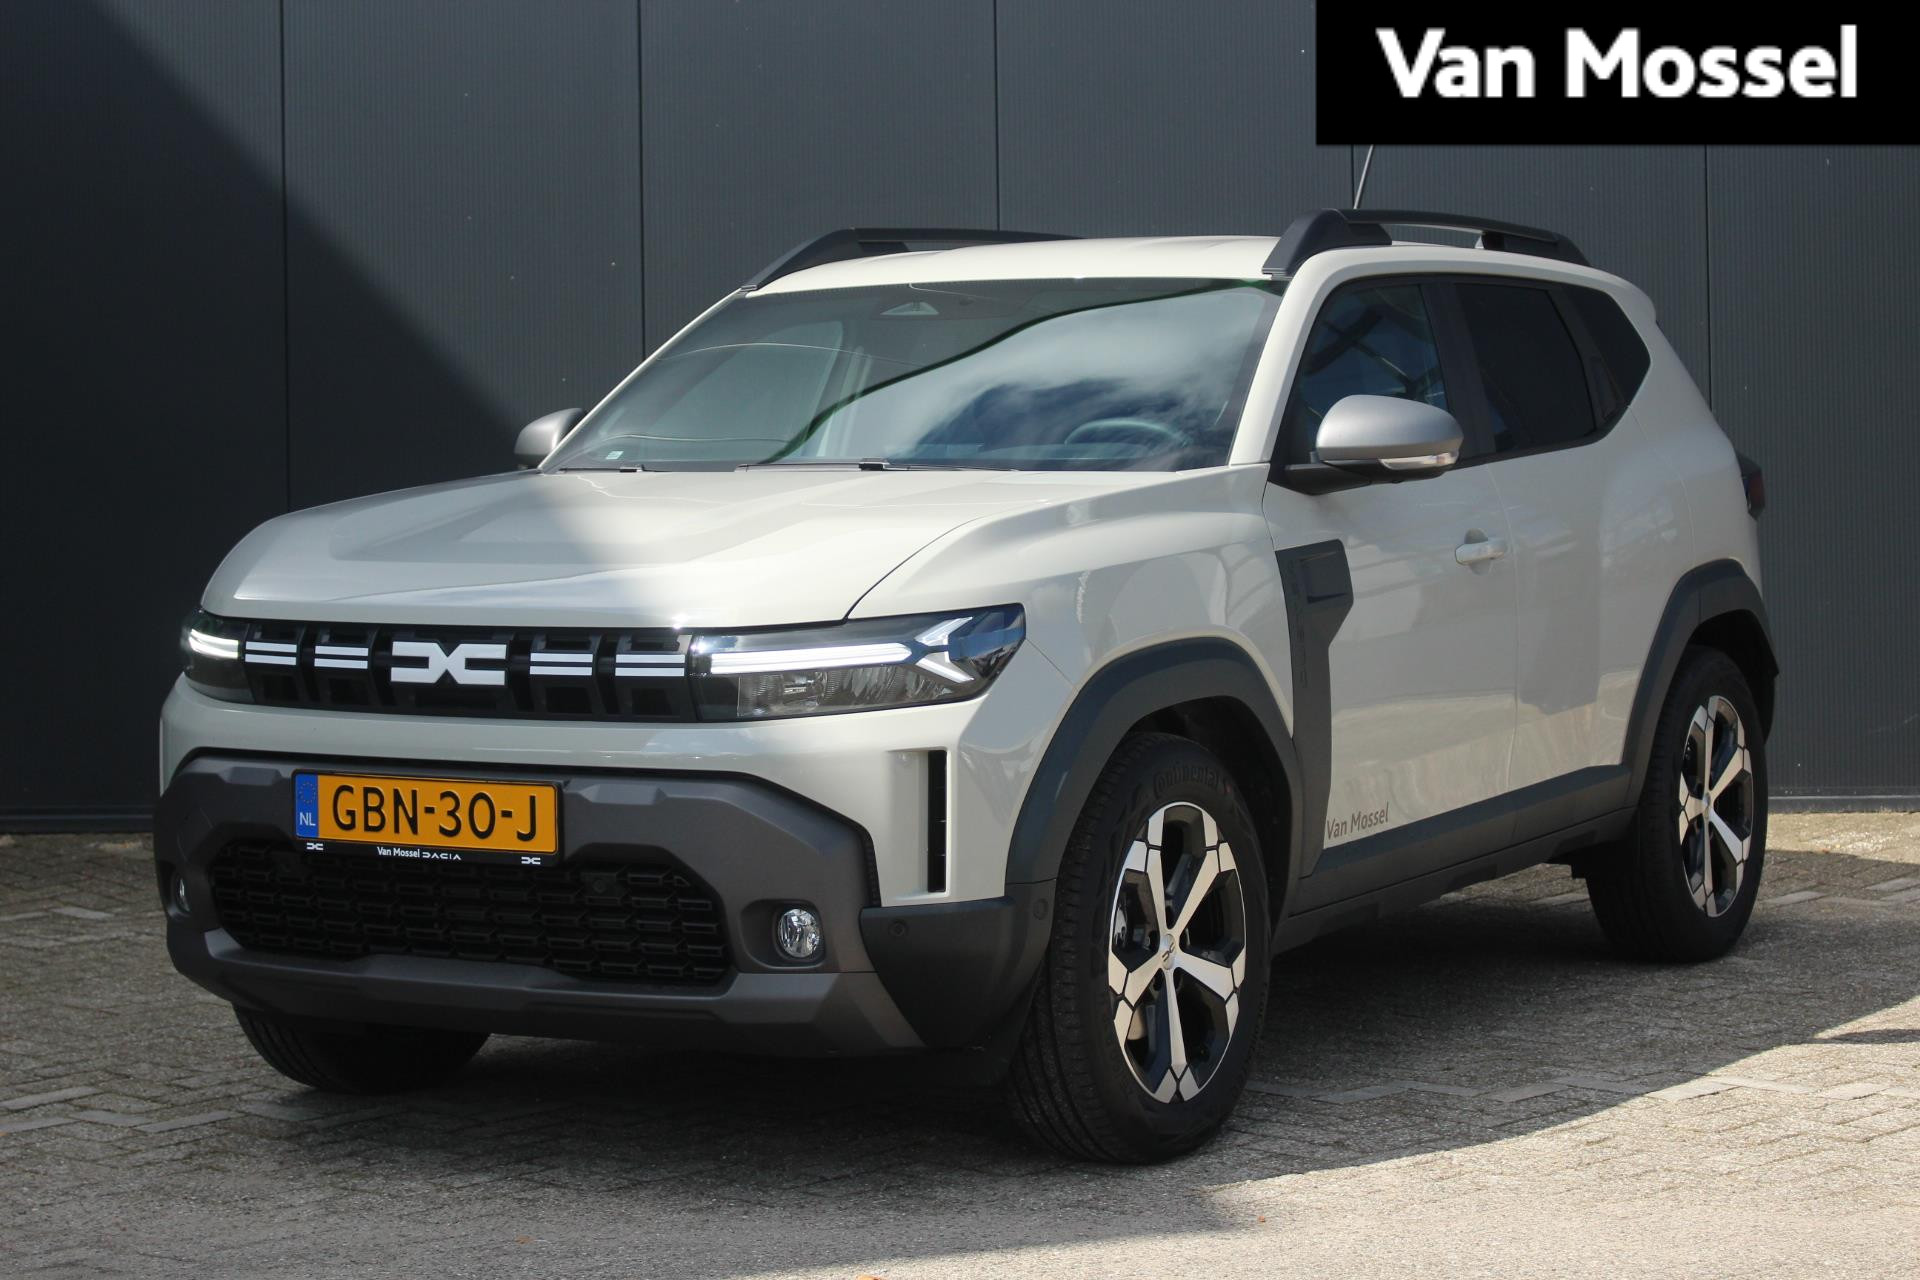 Dacia Duster 1.6 Hybrid 140Pk Journey | Apple & Android Carplay | Climate Control | Parkeersensoren Voor & Achter + 360 Camera | Privacy Glass | Cruise Control | Licht & Regensensor |